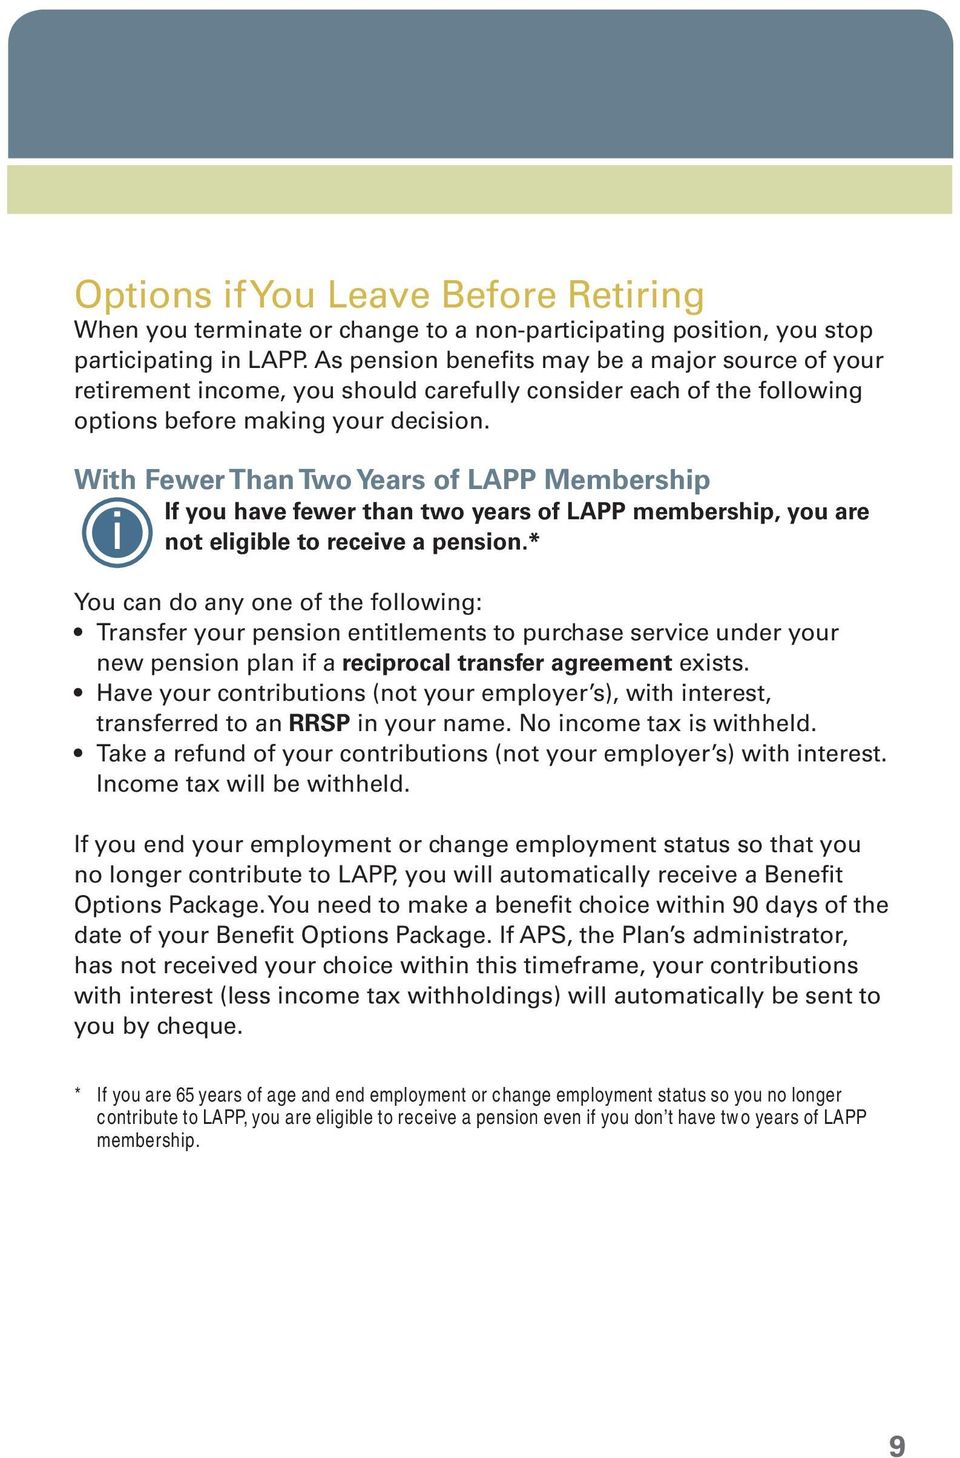 With Fewer Than Two Years of LAPP Membership If you have fewer than two years of LAPP membership, you are not eligible to receive a pension.